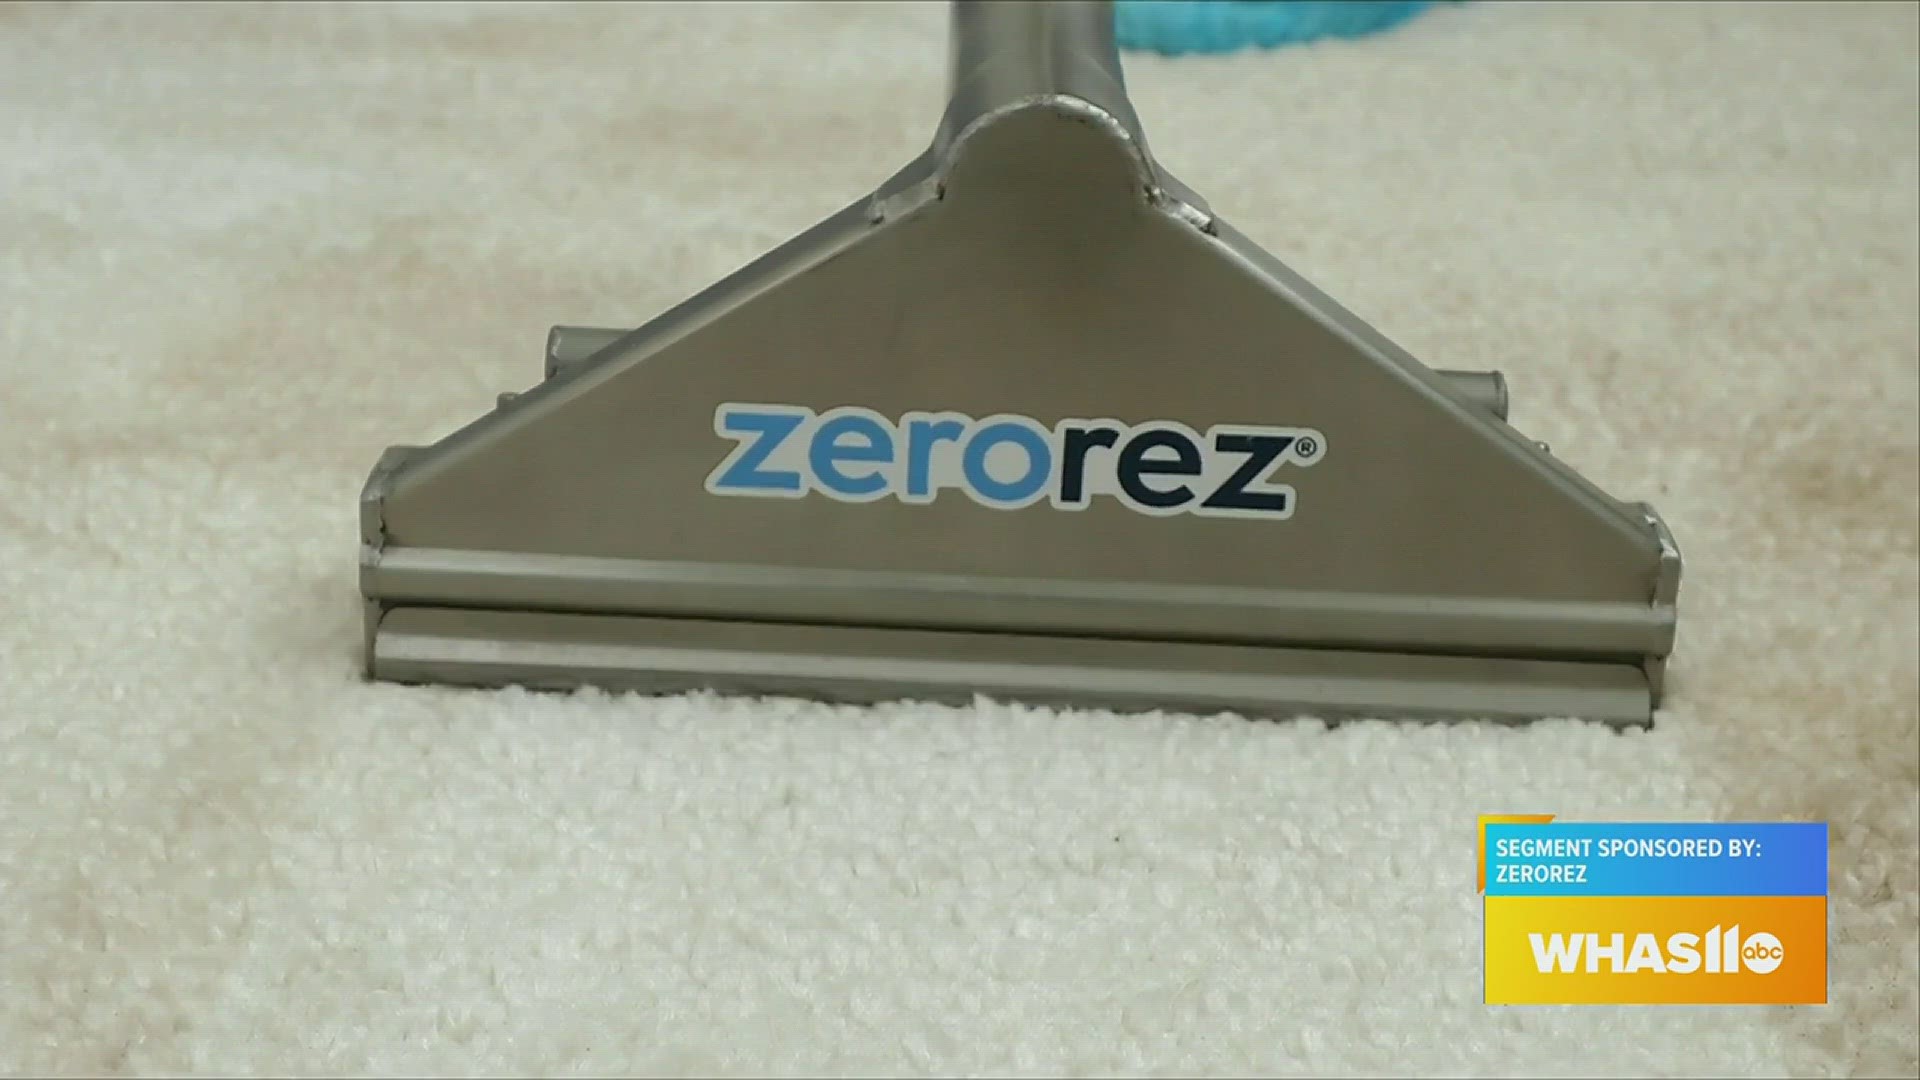 Zerorez has great cleaning technology to give your home a powerful clean.